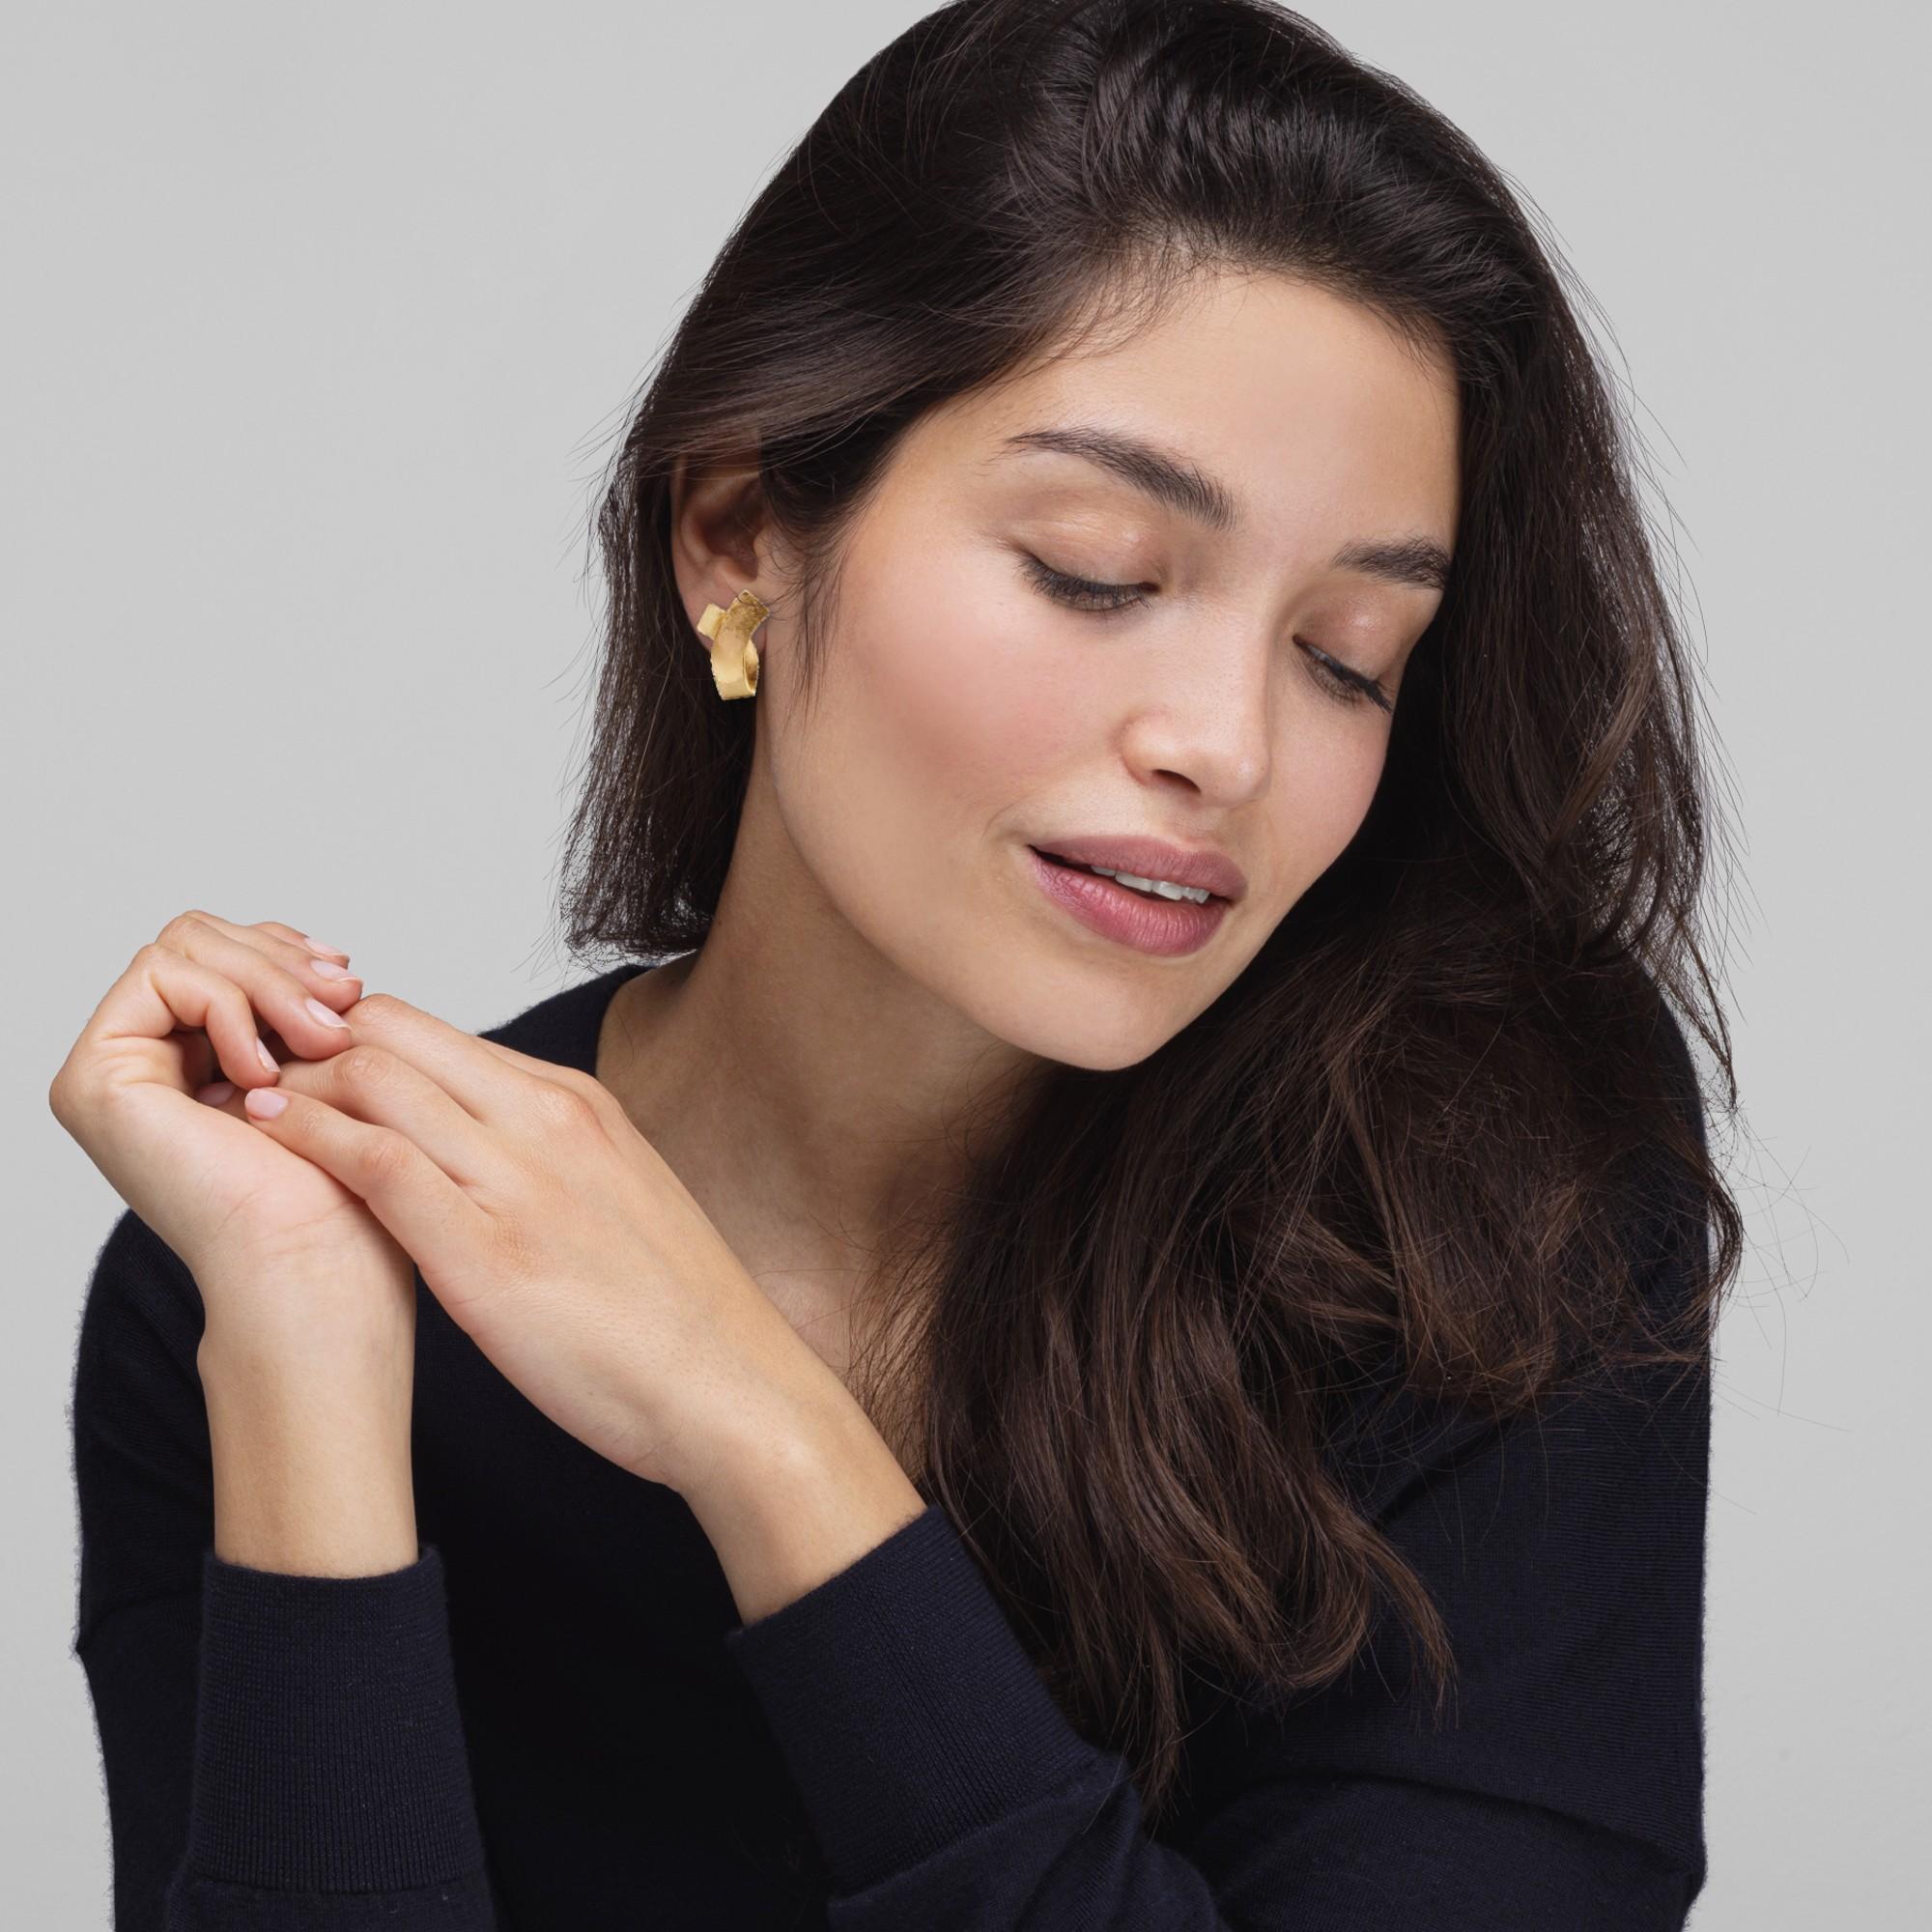 Alex Jona design collection, hand crafted in Italy, 18 karat rough frosted yellow gold stud earrings.
Dimensions: H 0.96in/24.51mm, W 0.70in/18mm, D 0.19in/5mm.

Alex Jona jewels stand out, not only for their special design and for the excellent